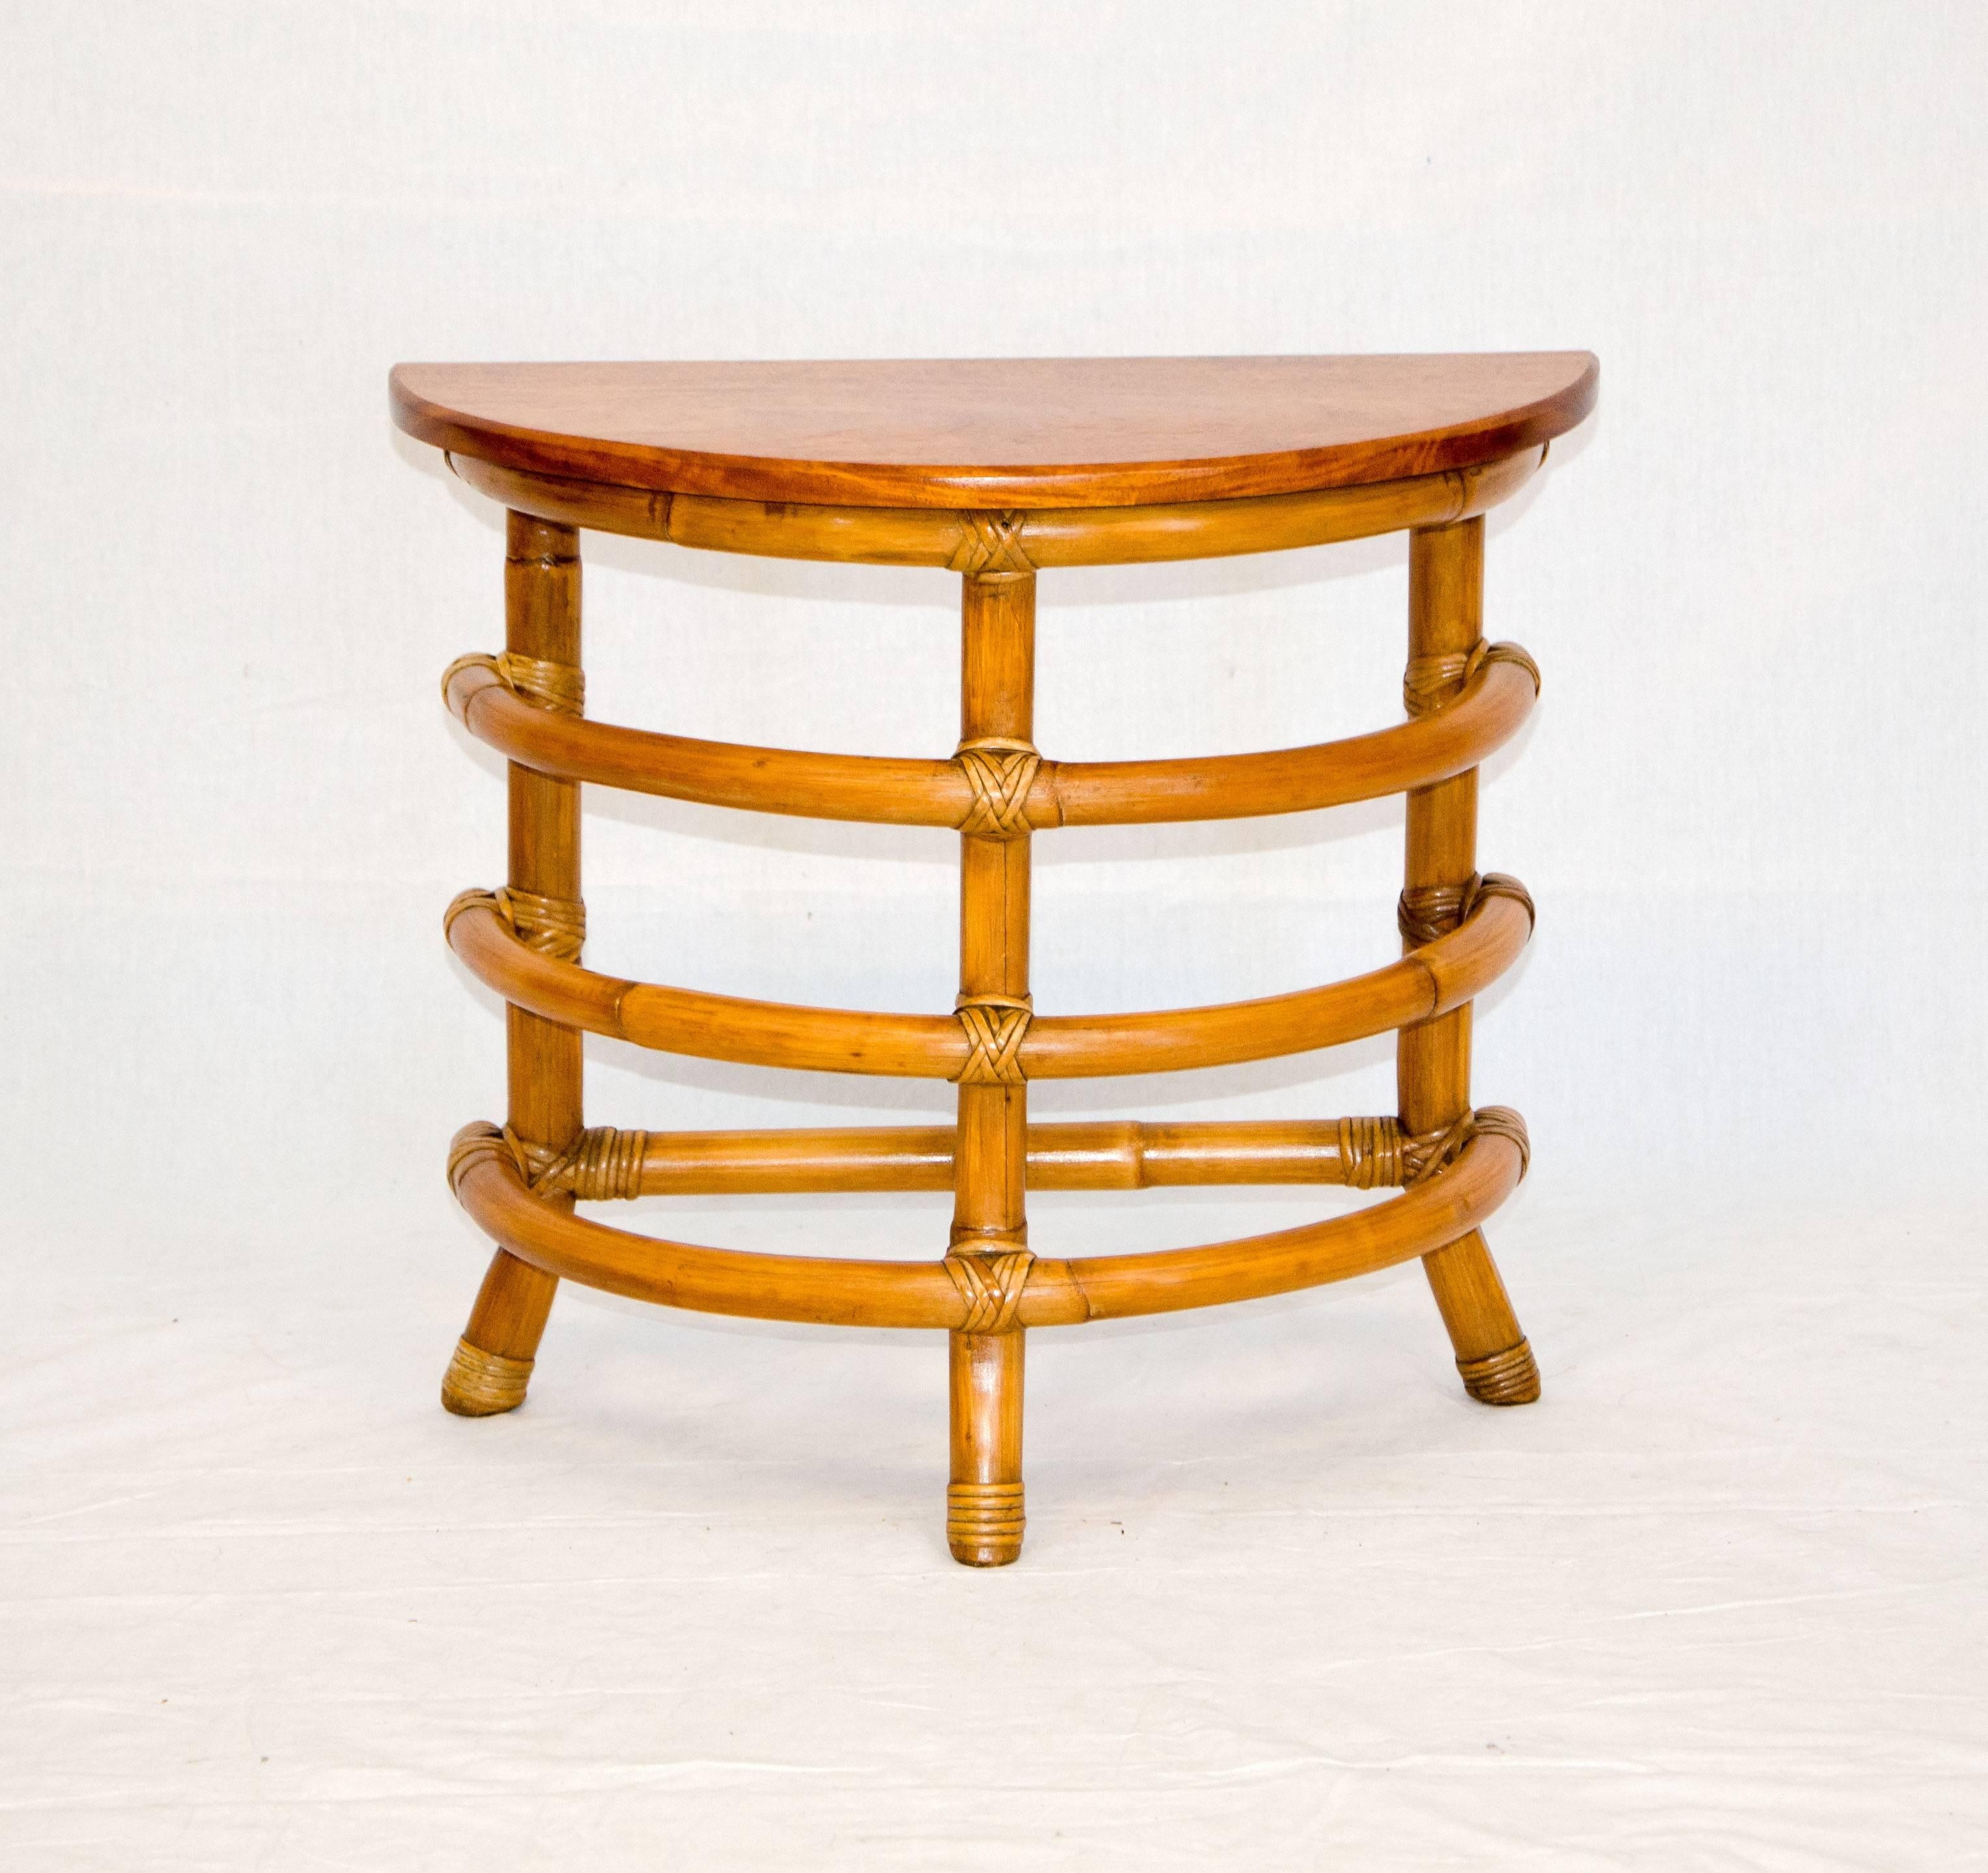 Pair of small rattan furniture items to accent your interior.
Half round side or accent table: Rattan and solid Koa (monkey pod): 22" wide by 11' deep and 19 1/2" tall.
Two-tier circular stand: Rattan and solid mahogany, 25" tall 13